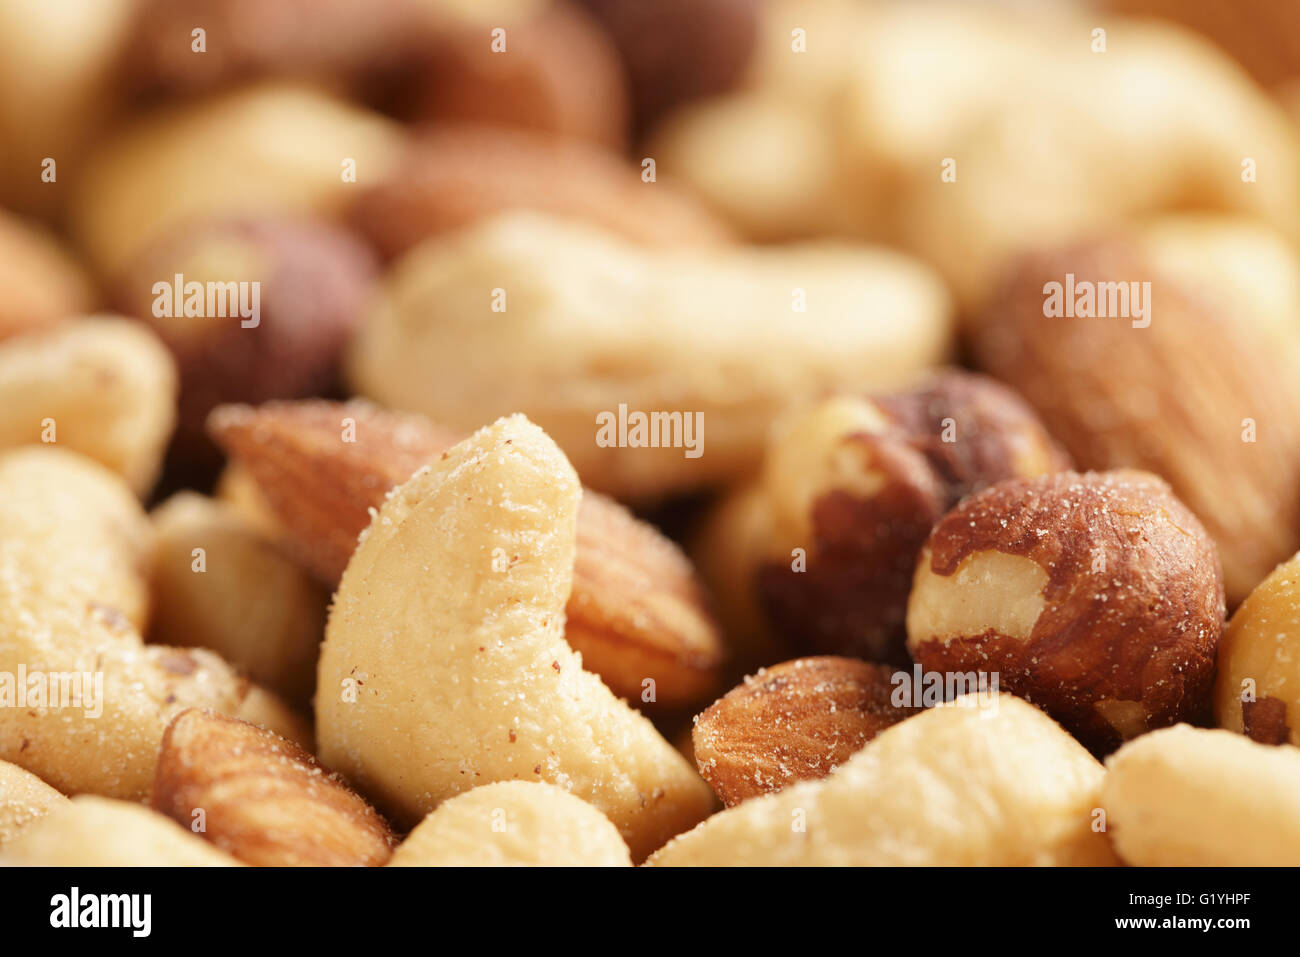 salted nut mix background Stock Photo